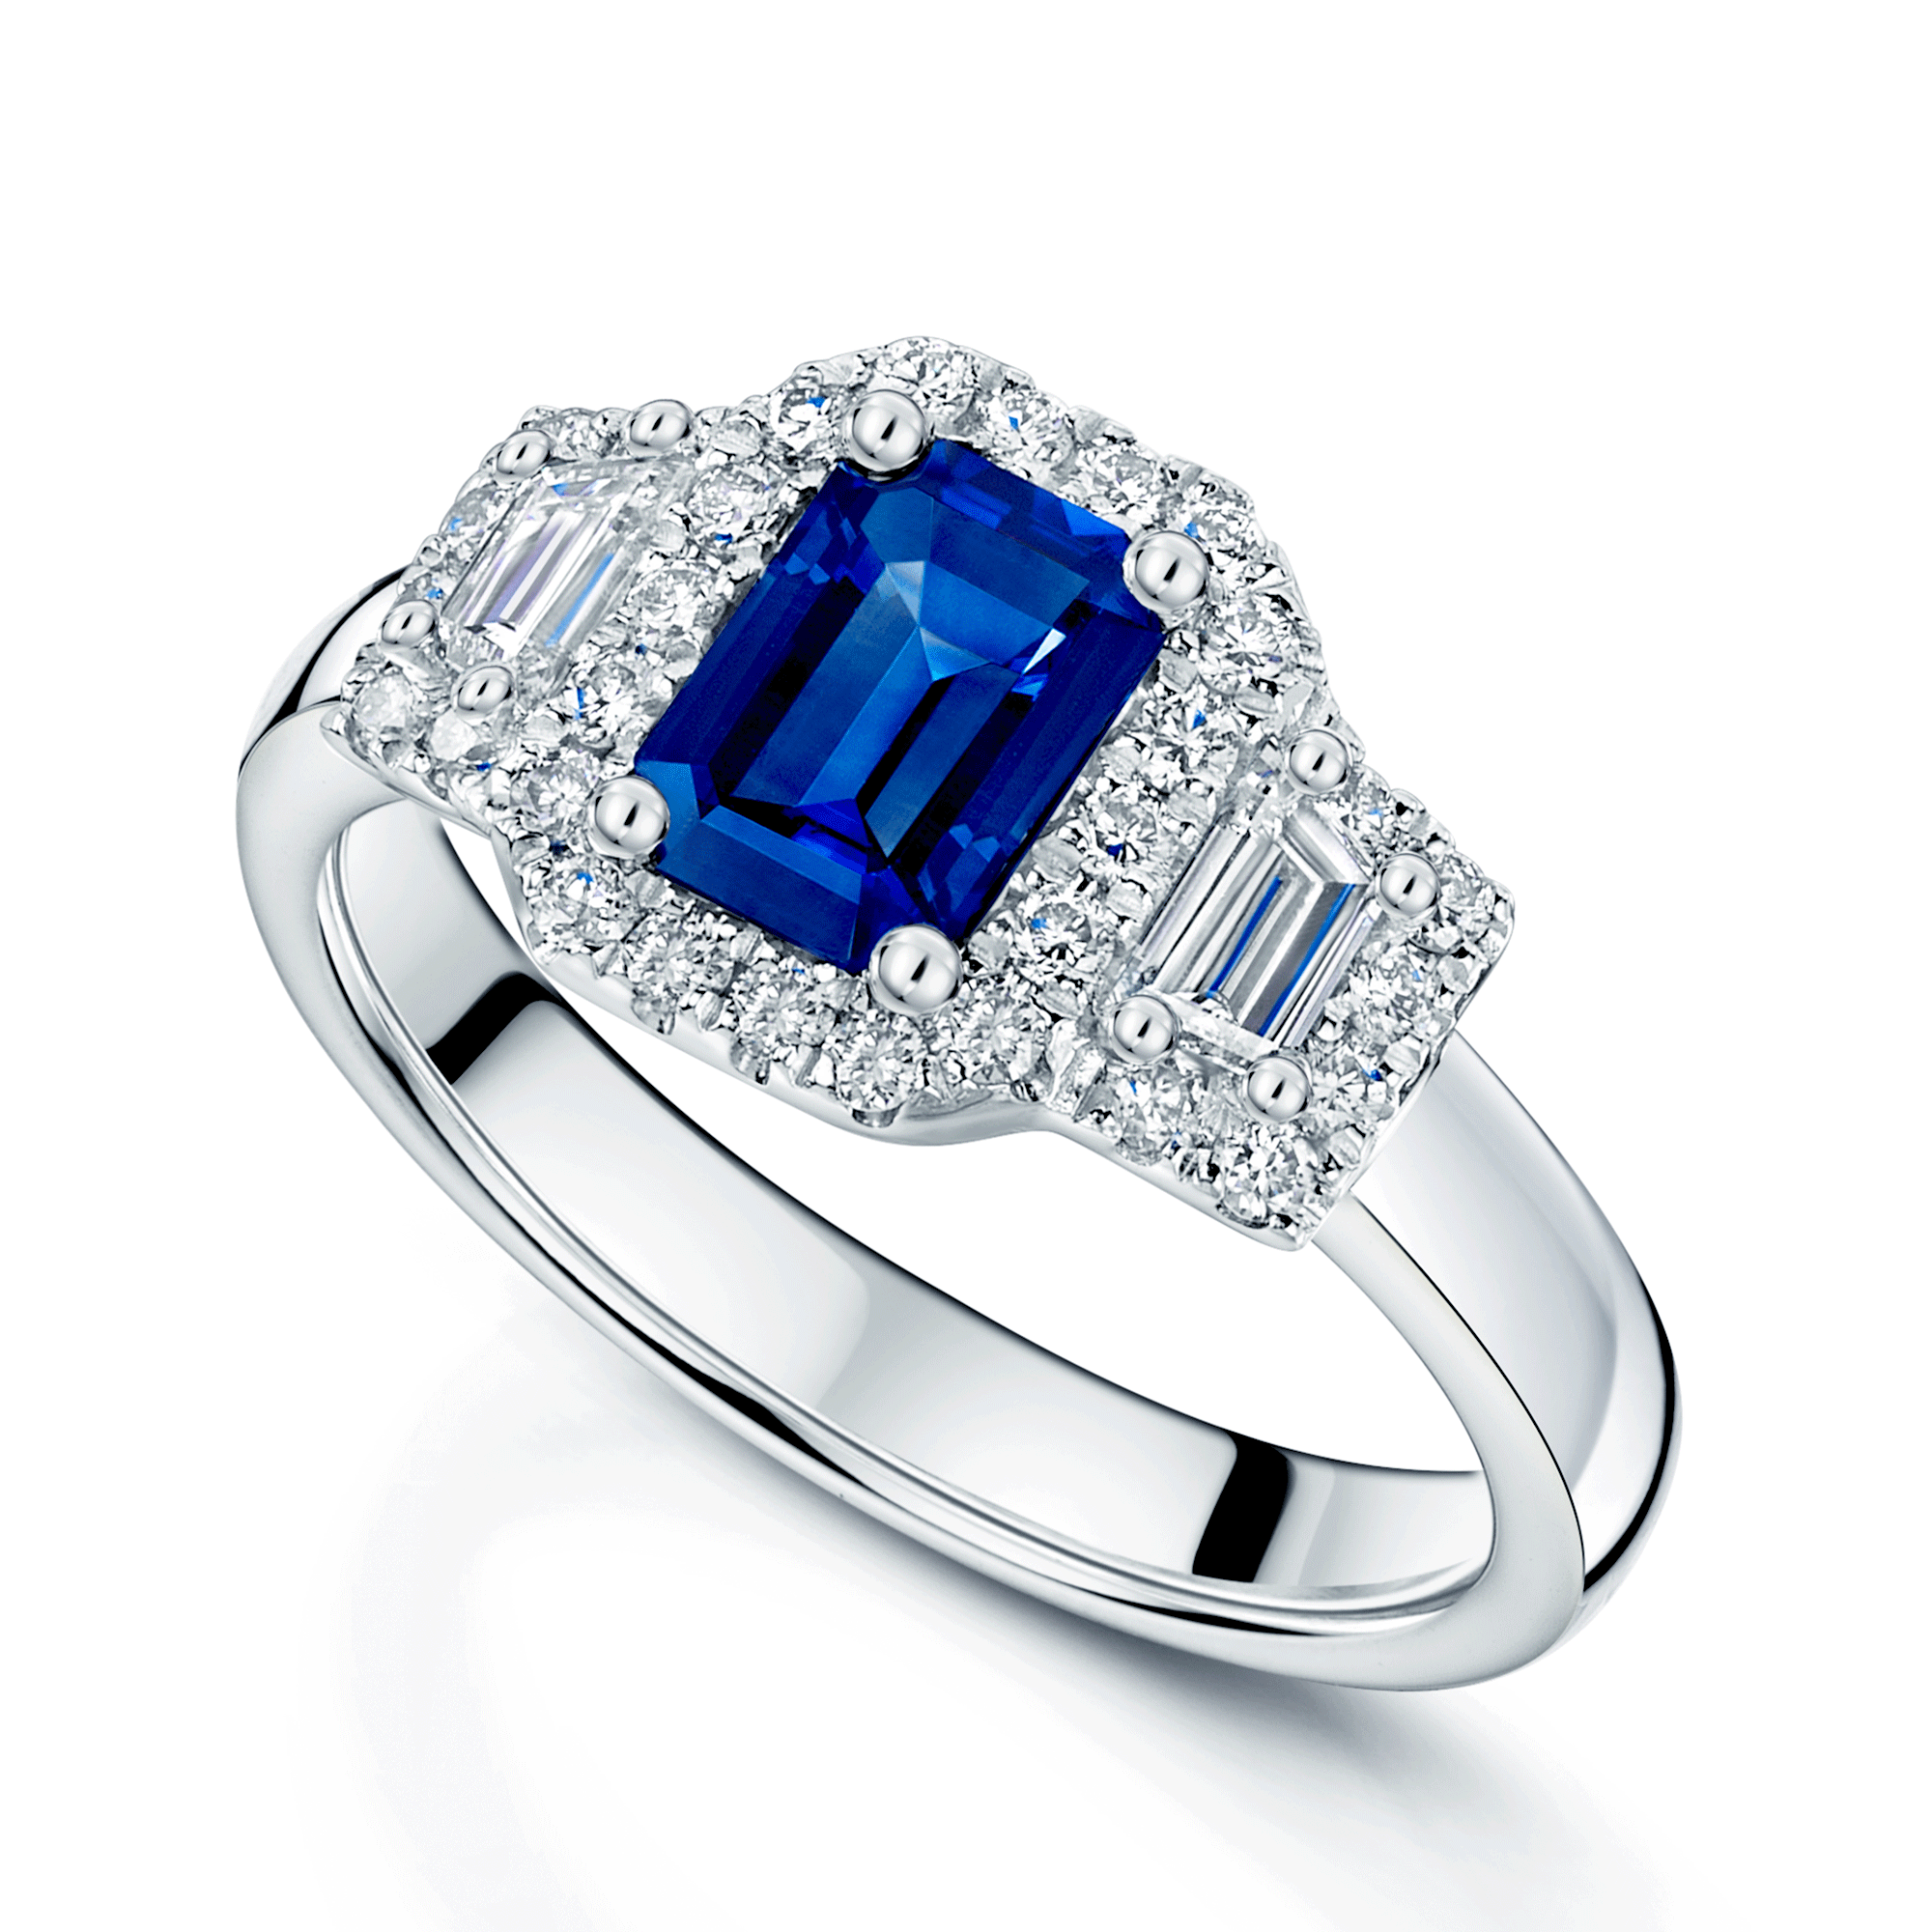 Platinum Sapphire And Baguette Cut Diamond Three Stone Ring With A Halo Surround